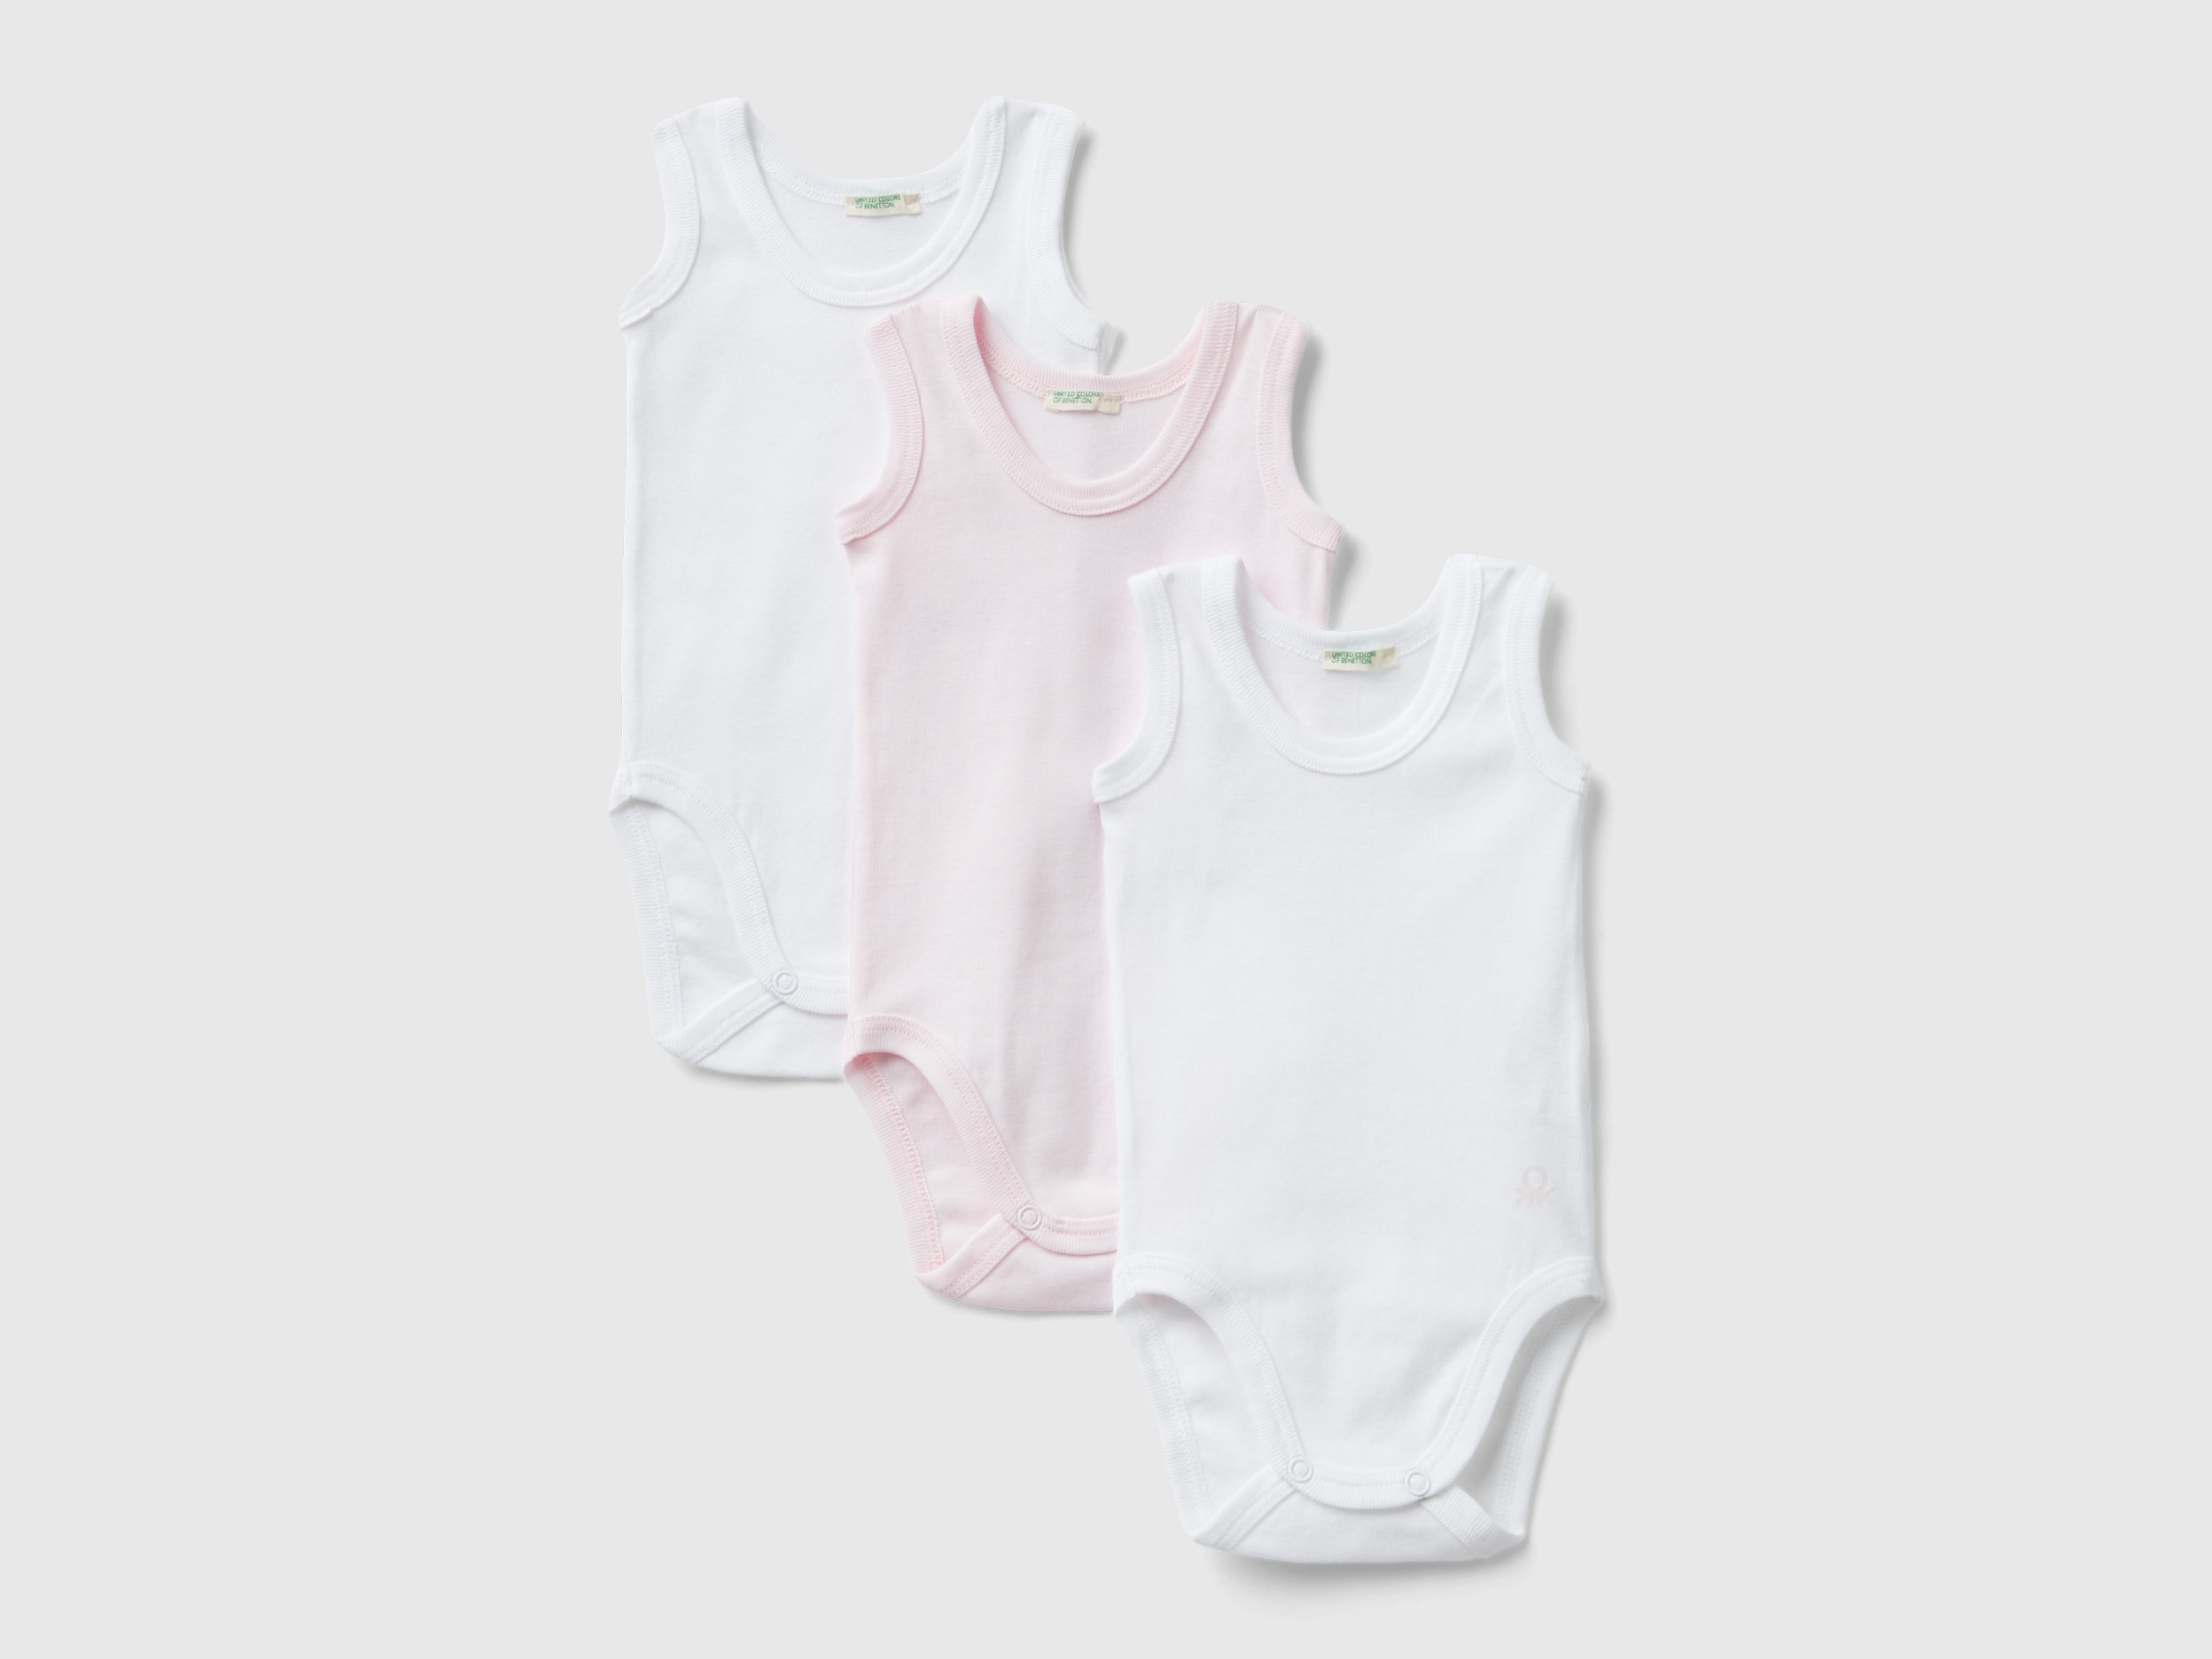 Image of Benetton, Three Solid Colored Tank Top Bodysuits, size 50, Multi-color, Kids